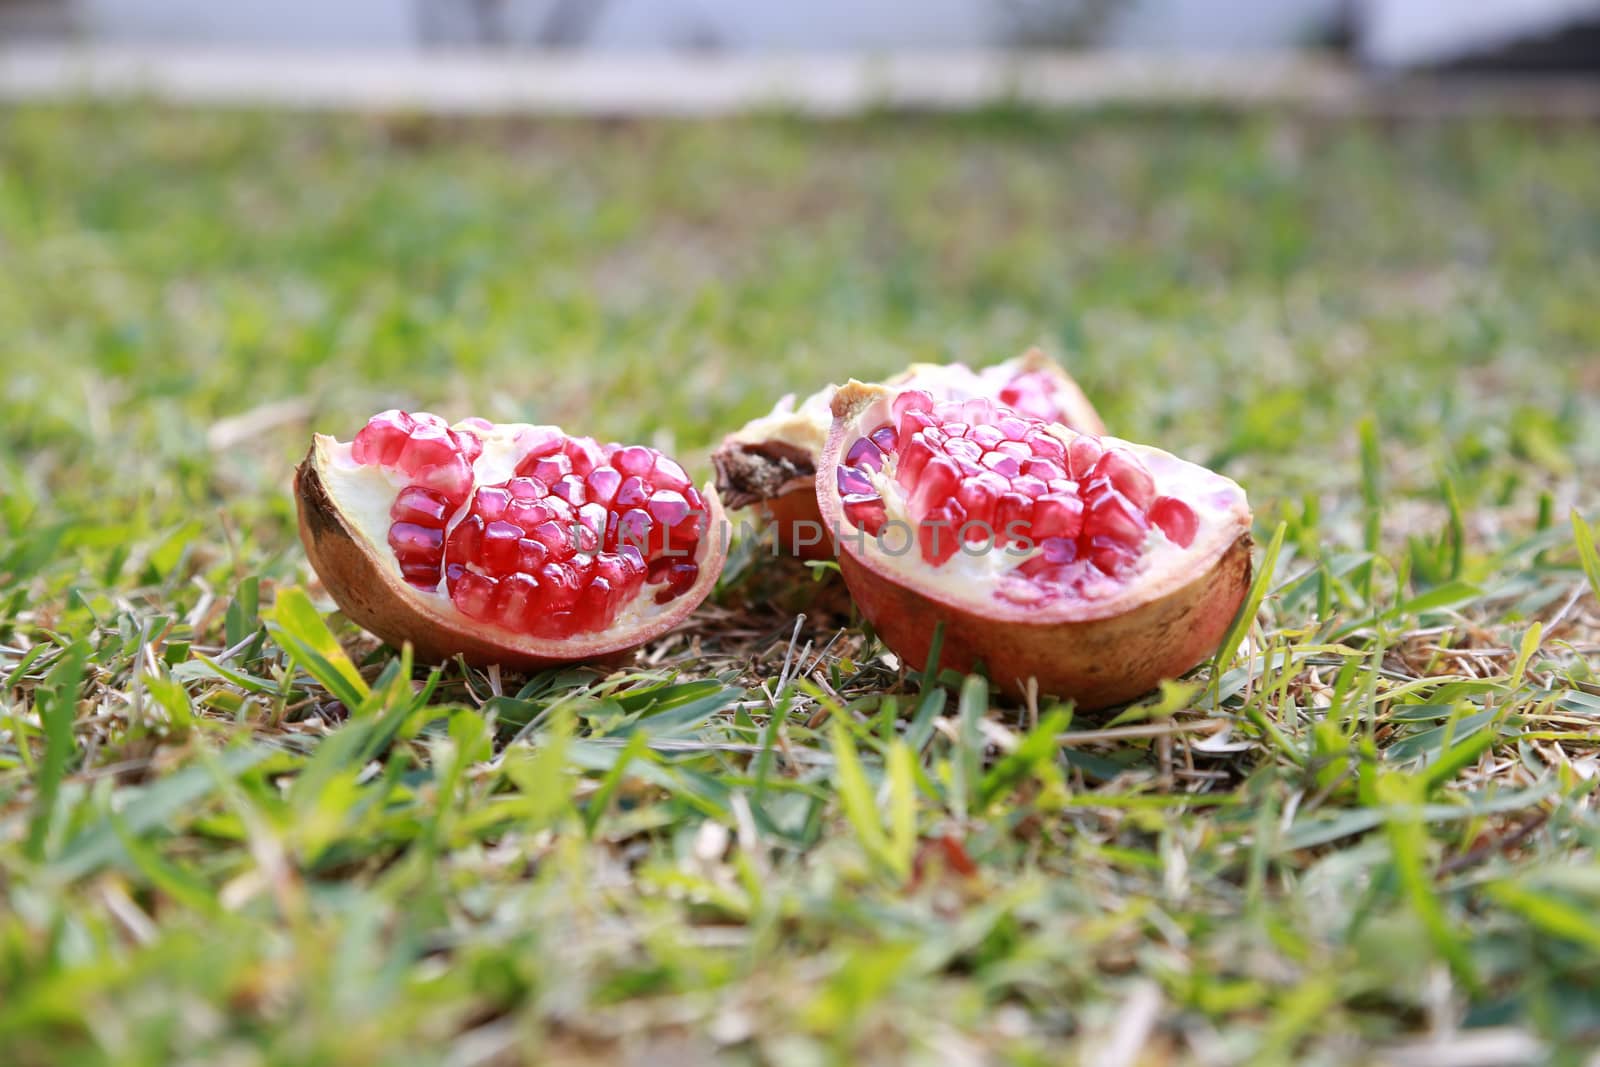 Three pieces of 1/4 of pomegranate are left in the garden